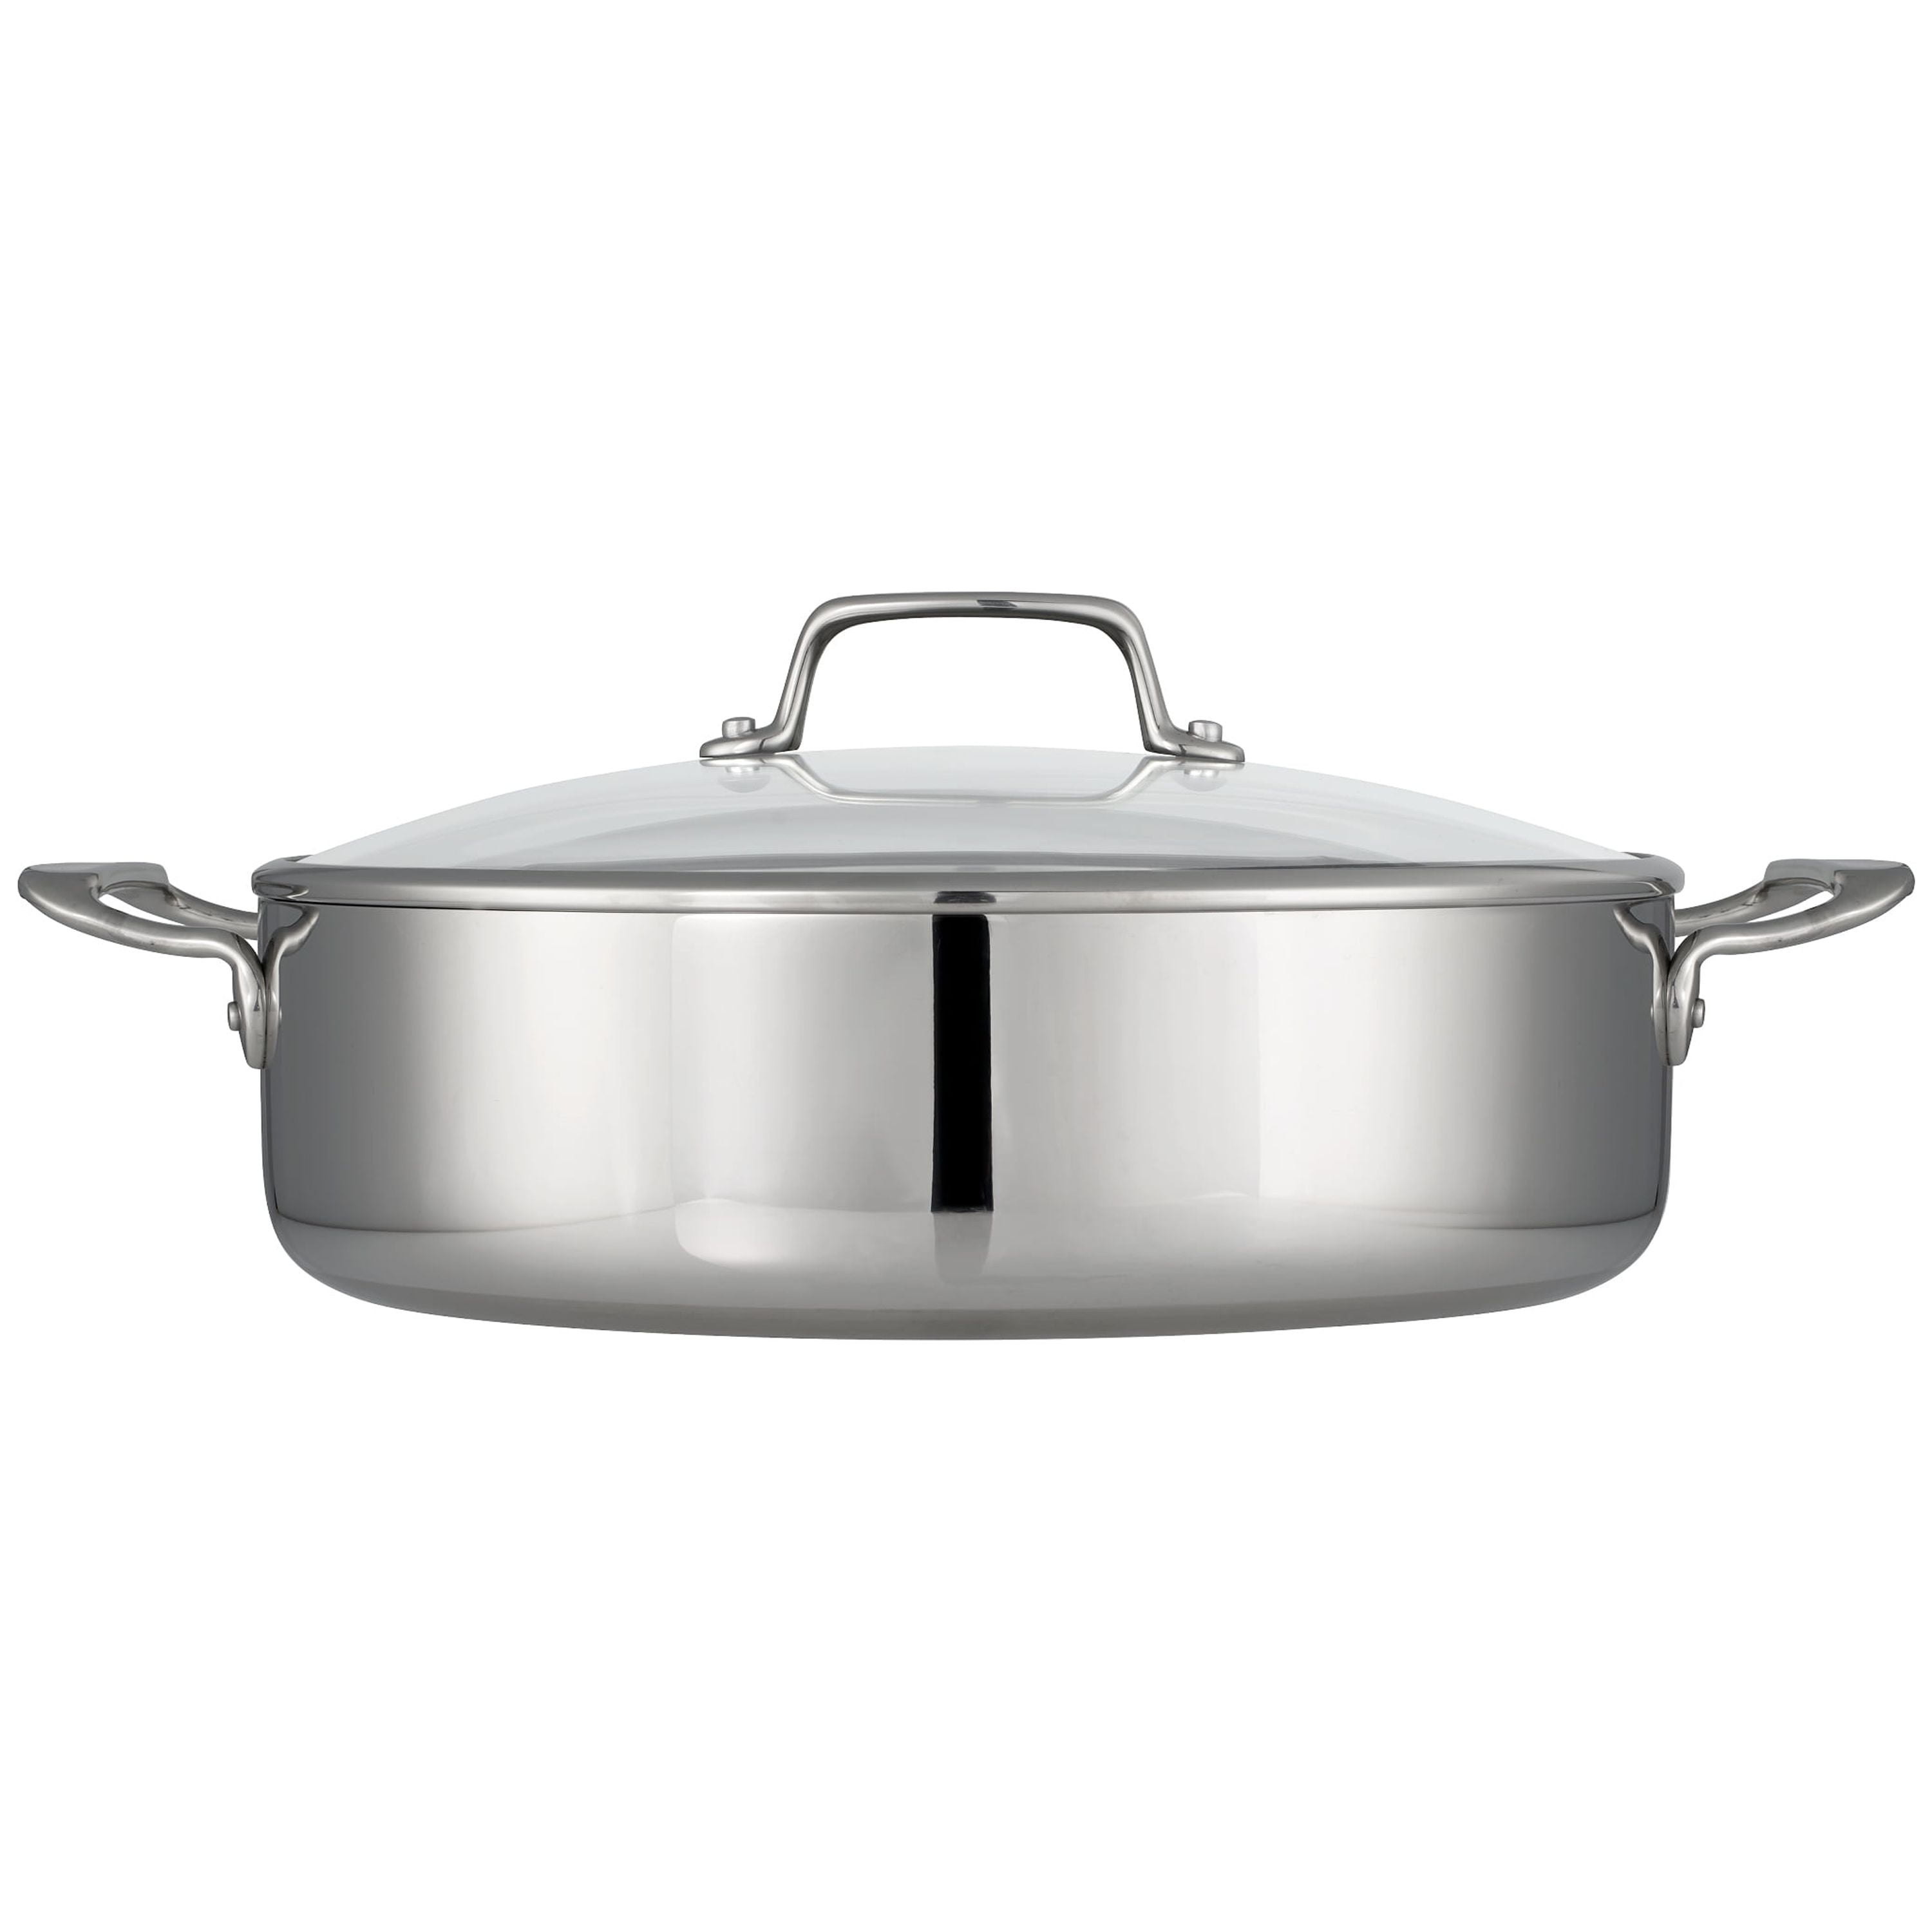 Tramontina Covered Braiser Stainless Steel Tri-Ply Clad 3 Qt